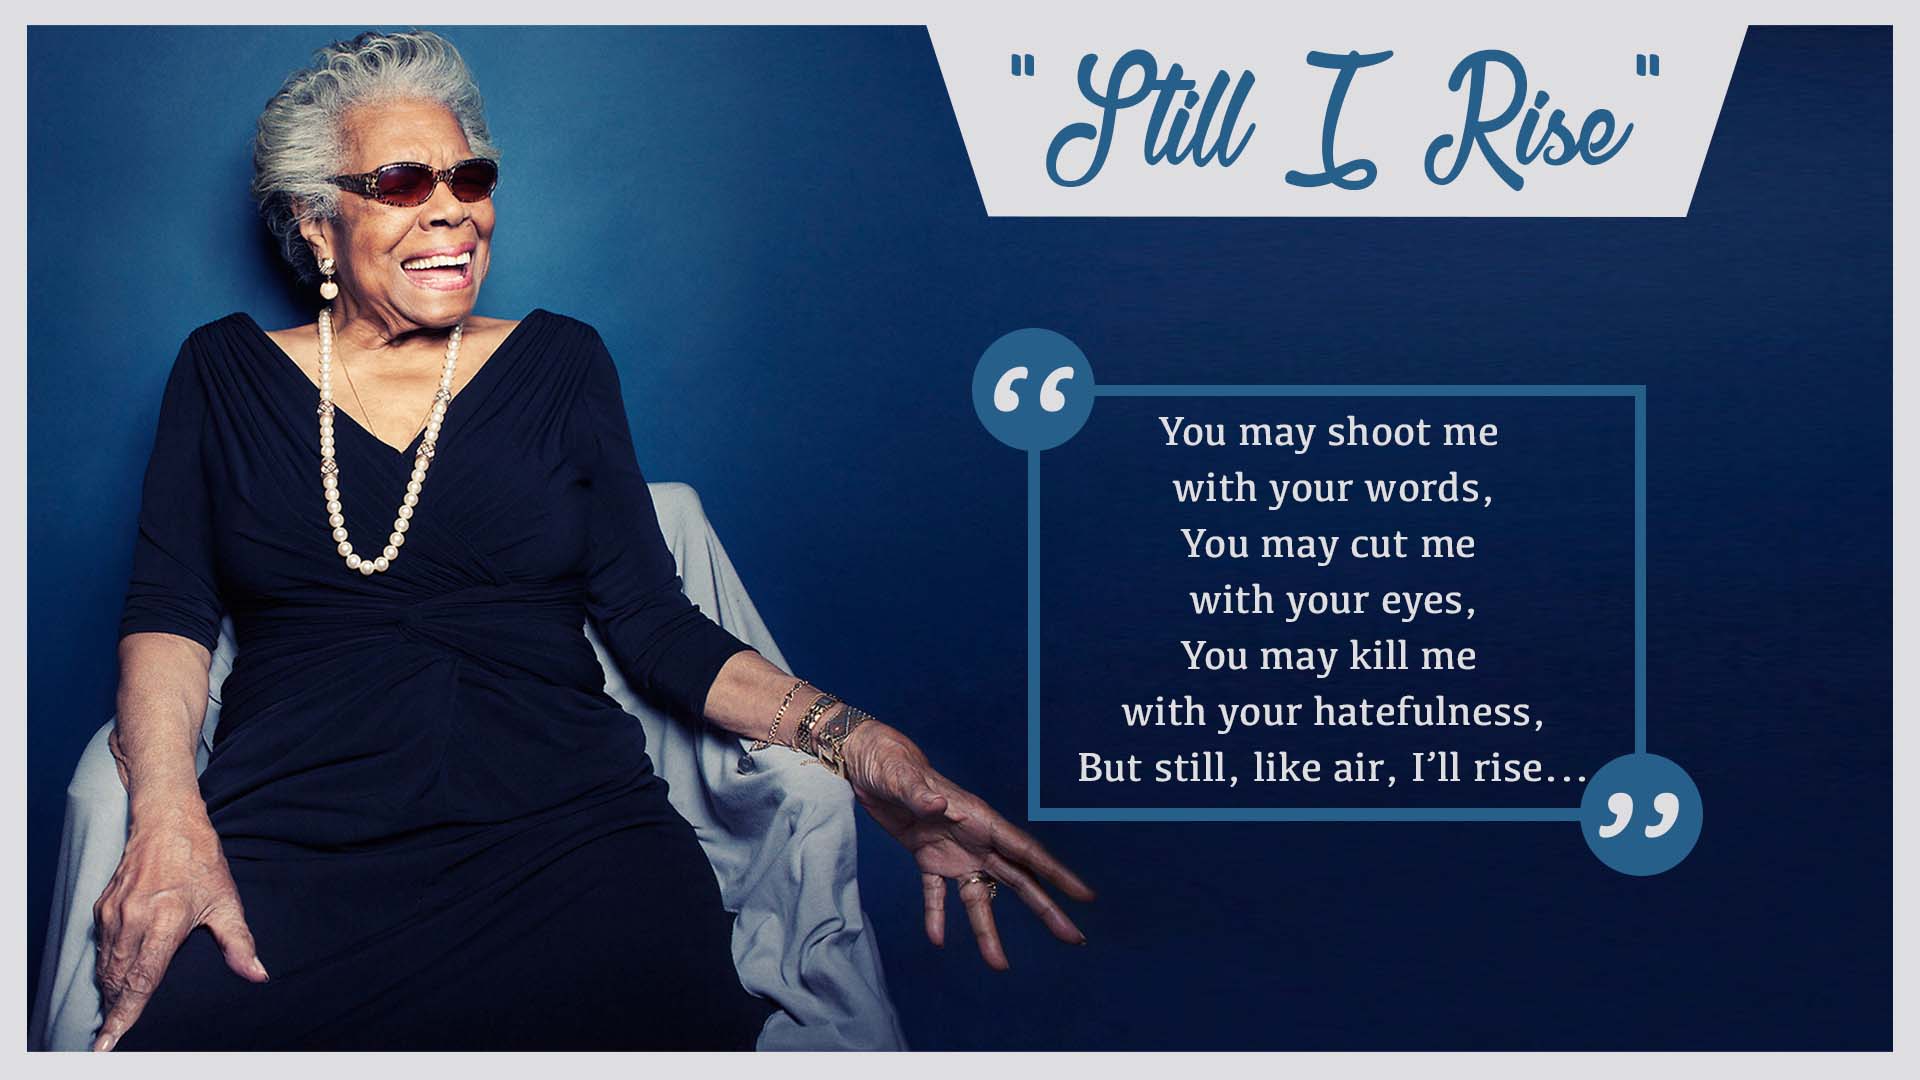 Maya Angelou, the legacy lives on